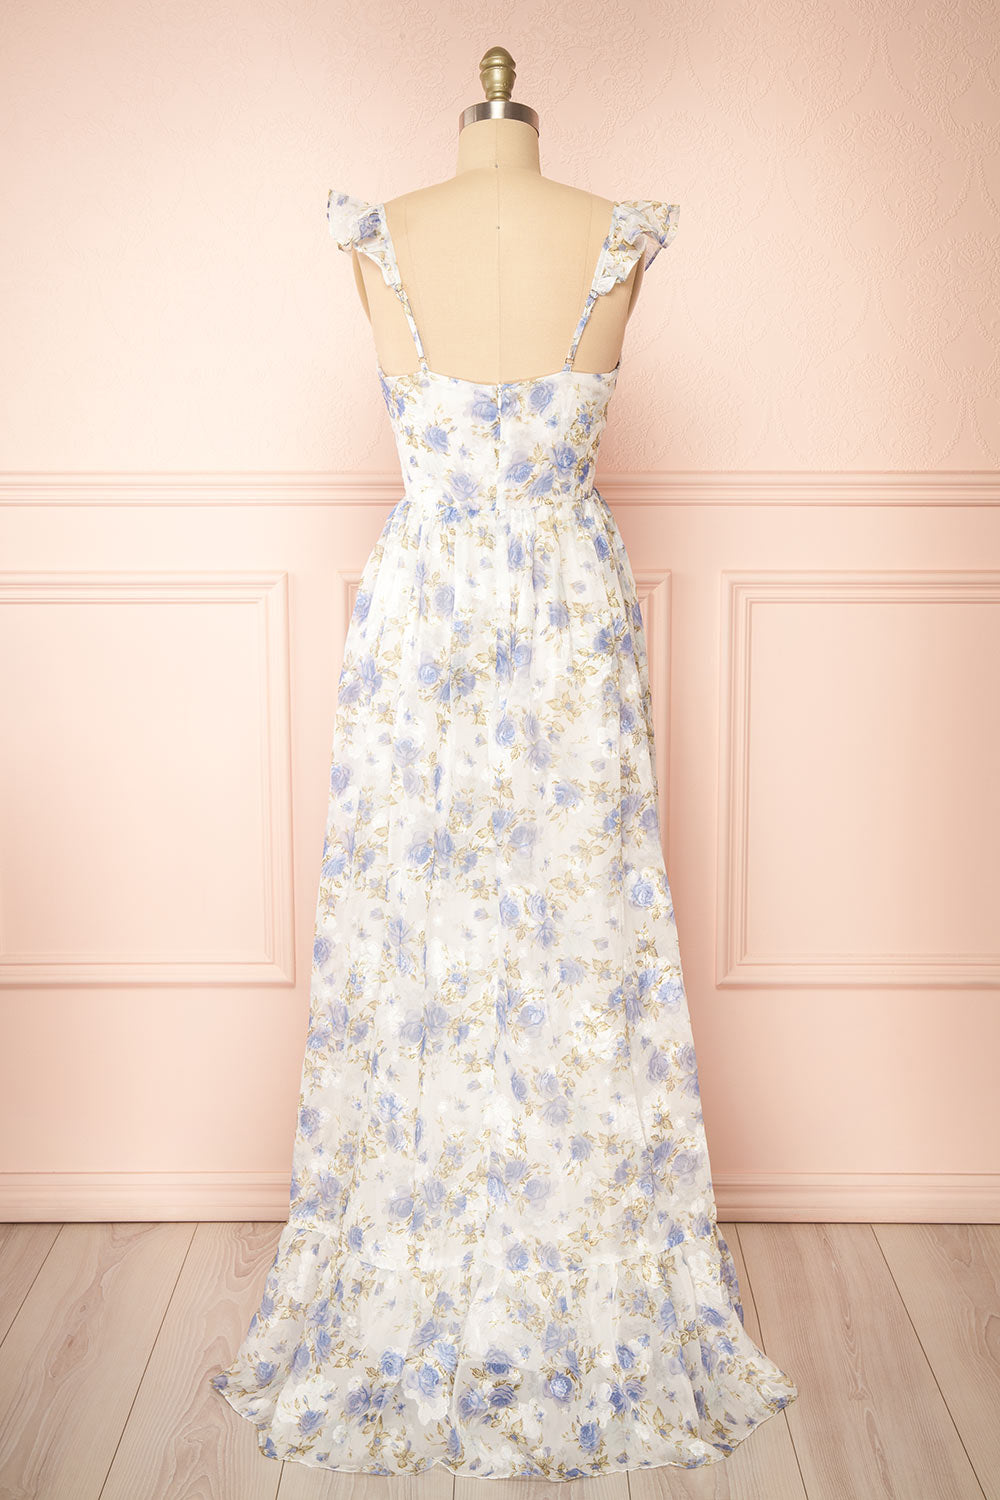 Phyllisia Blue Floral Maxi Dress w/ Ruffles | Boutique 1861 back view